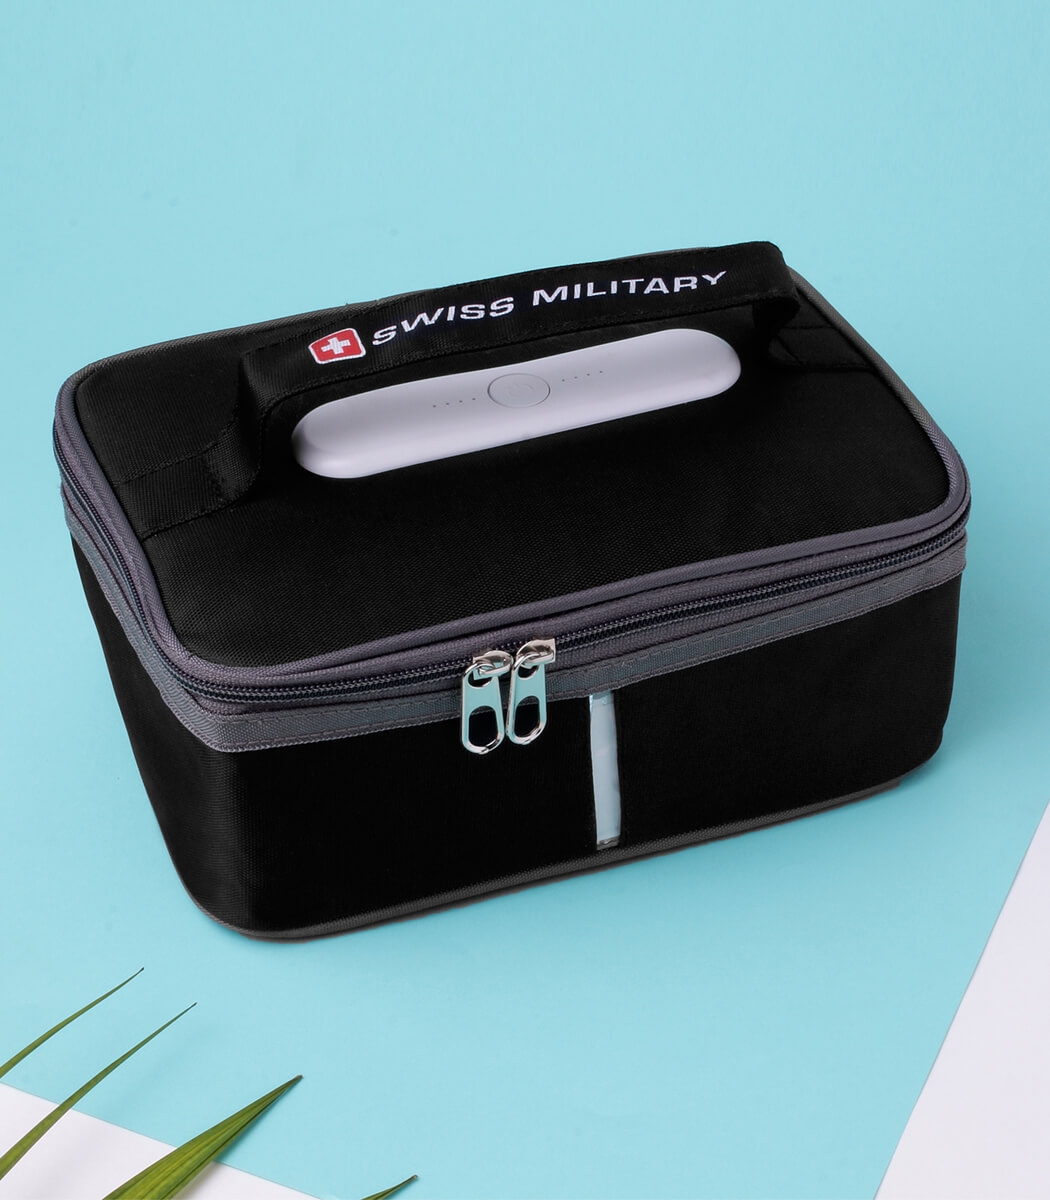 Swiss Military | Swiss Military UV Portable/Foldable Sterilizer/Disinfection Box/Bag for Mask/Mobile Phones/Jewelry/Baby Bottle/Toy/Car Key with Large Capacity- Black- SCV05 6